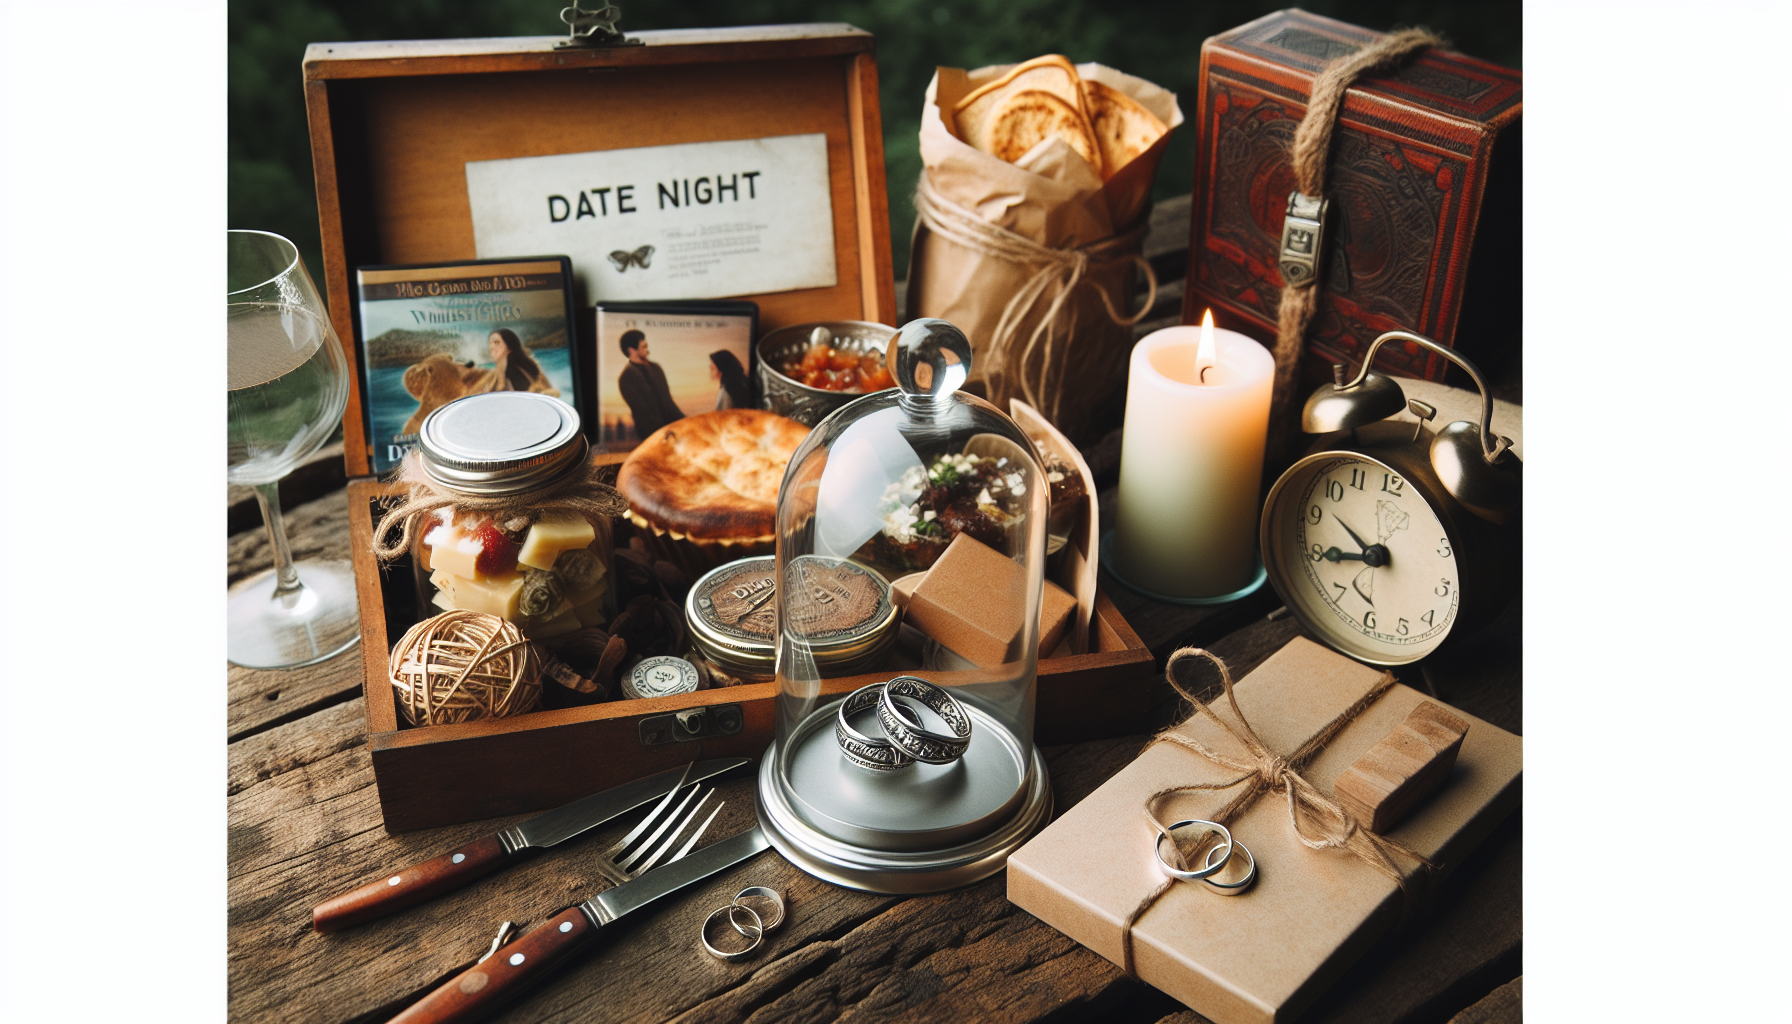 Romantic gifts that celebrate your relationship